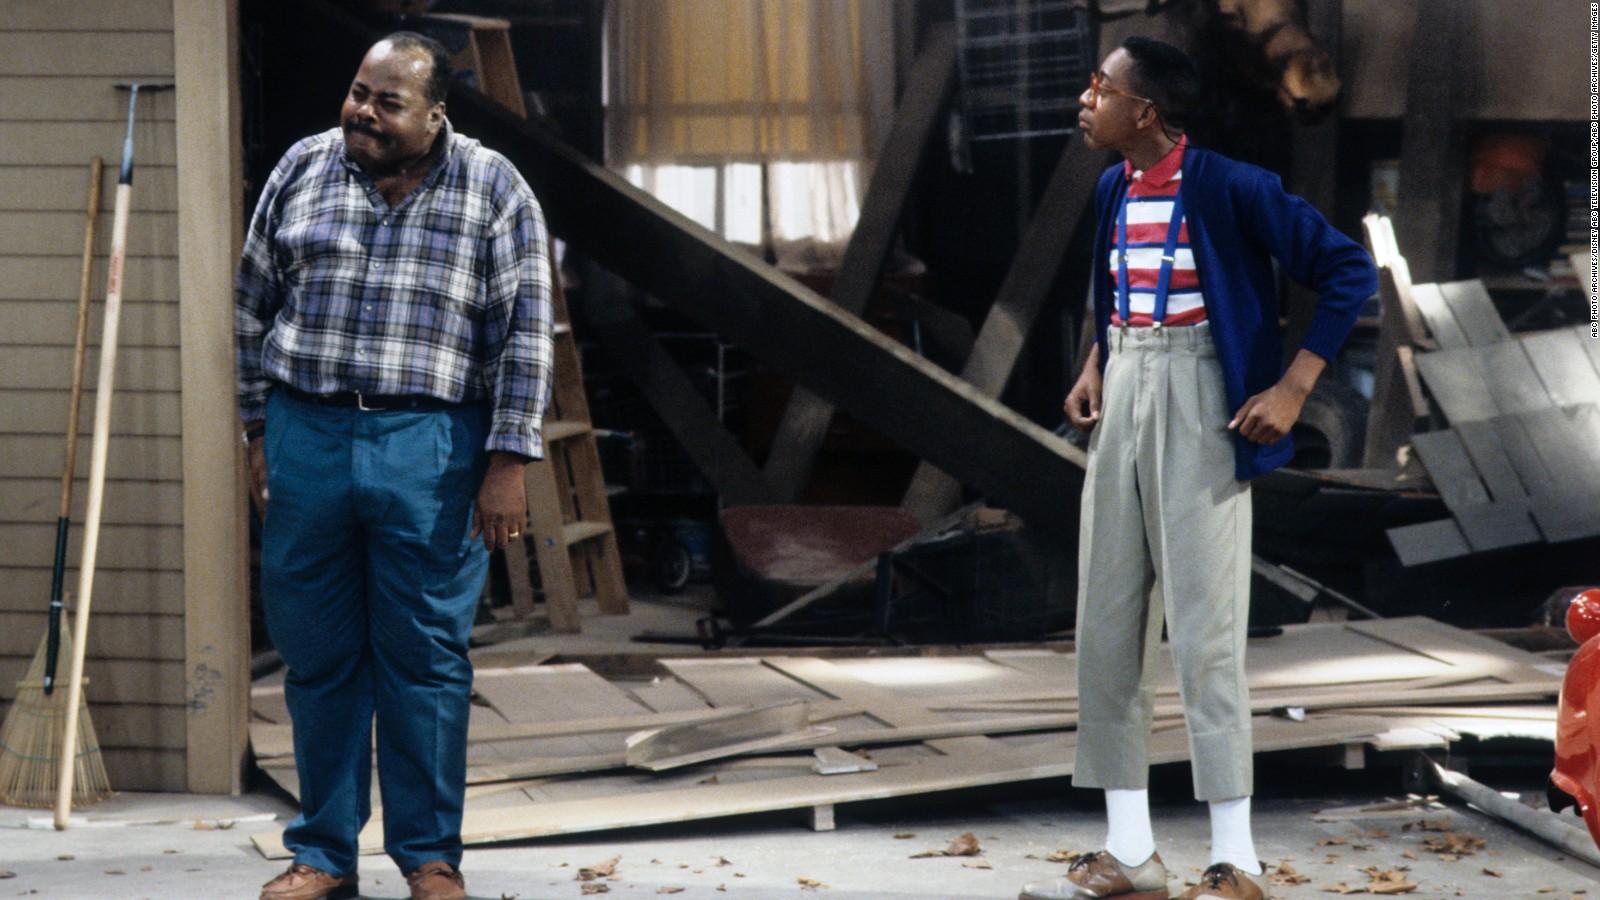 The 'Family Matters' home will be demolished